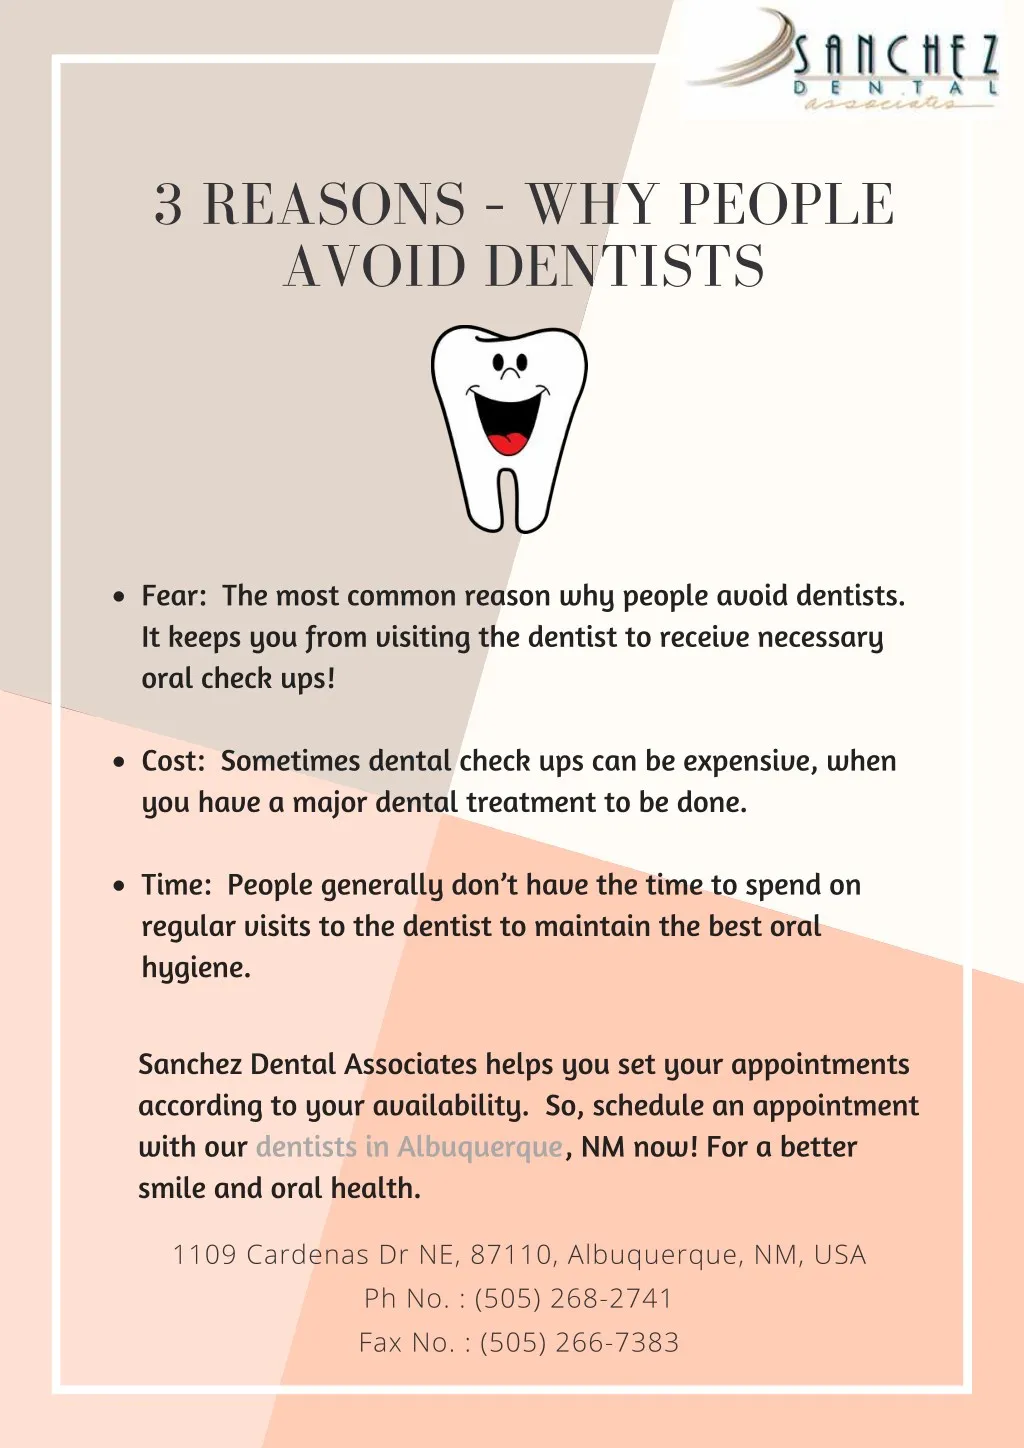 3 reasons why people avoid dentists